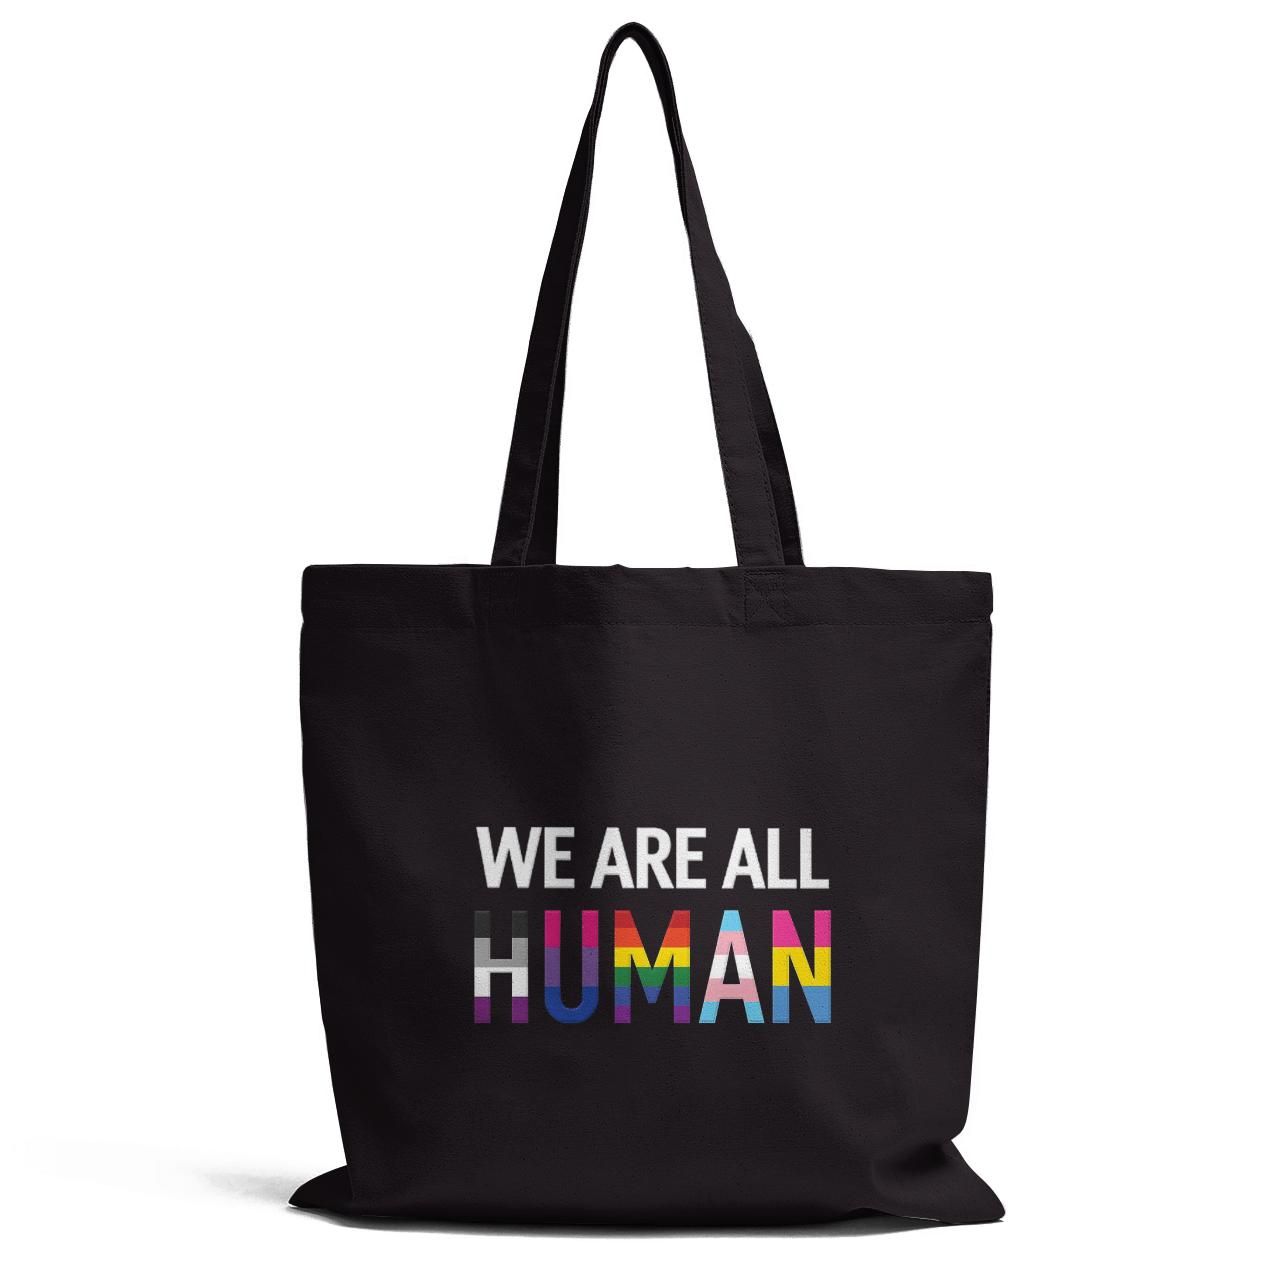 We Are All Human Tote Bag